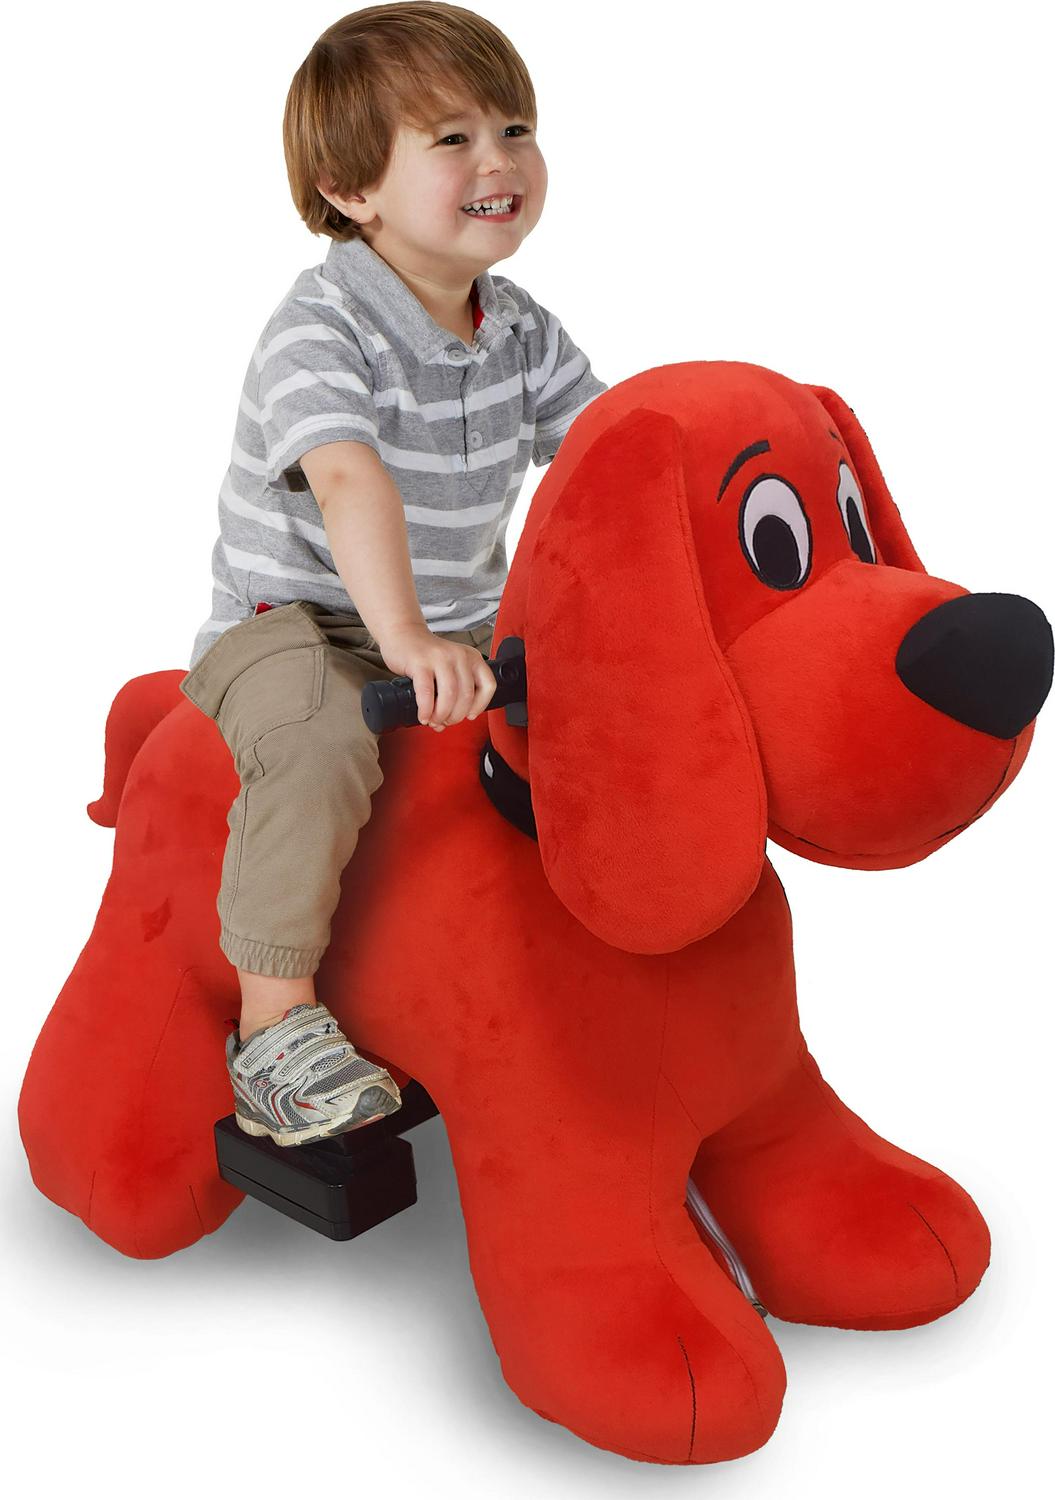 Clifford 6V Plush Ride-On with Dog House Included!